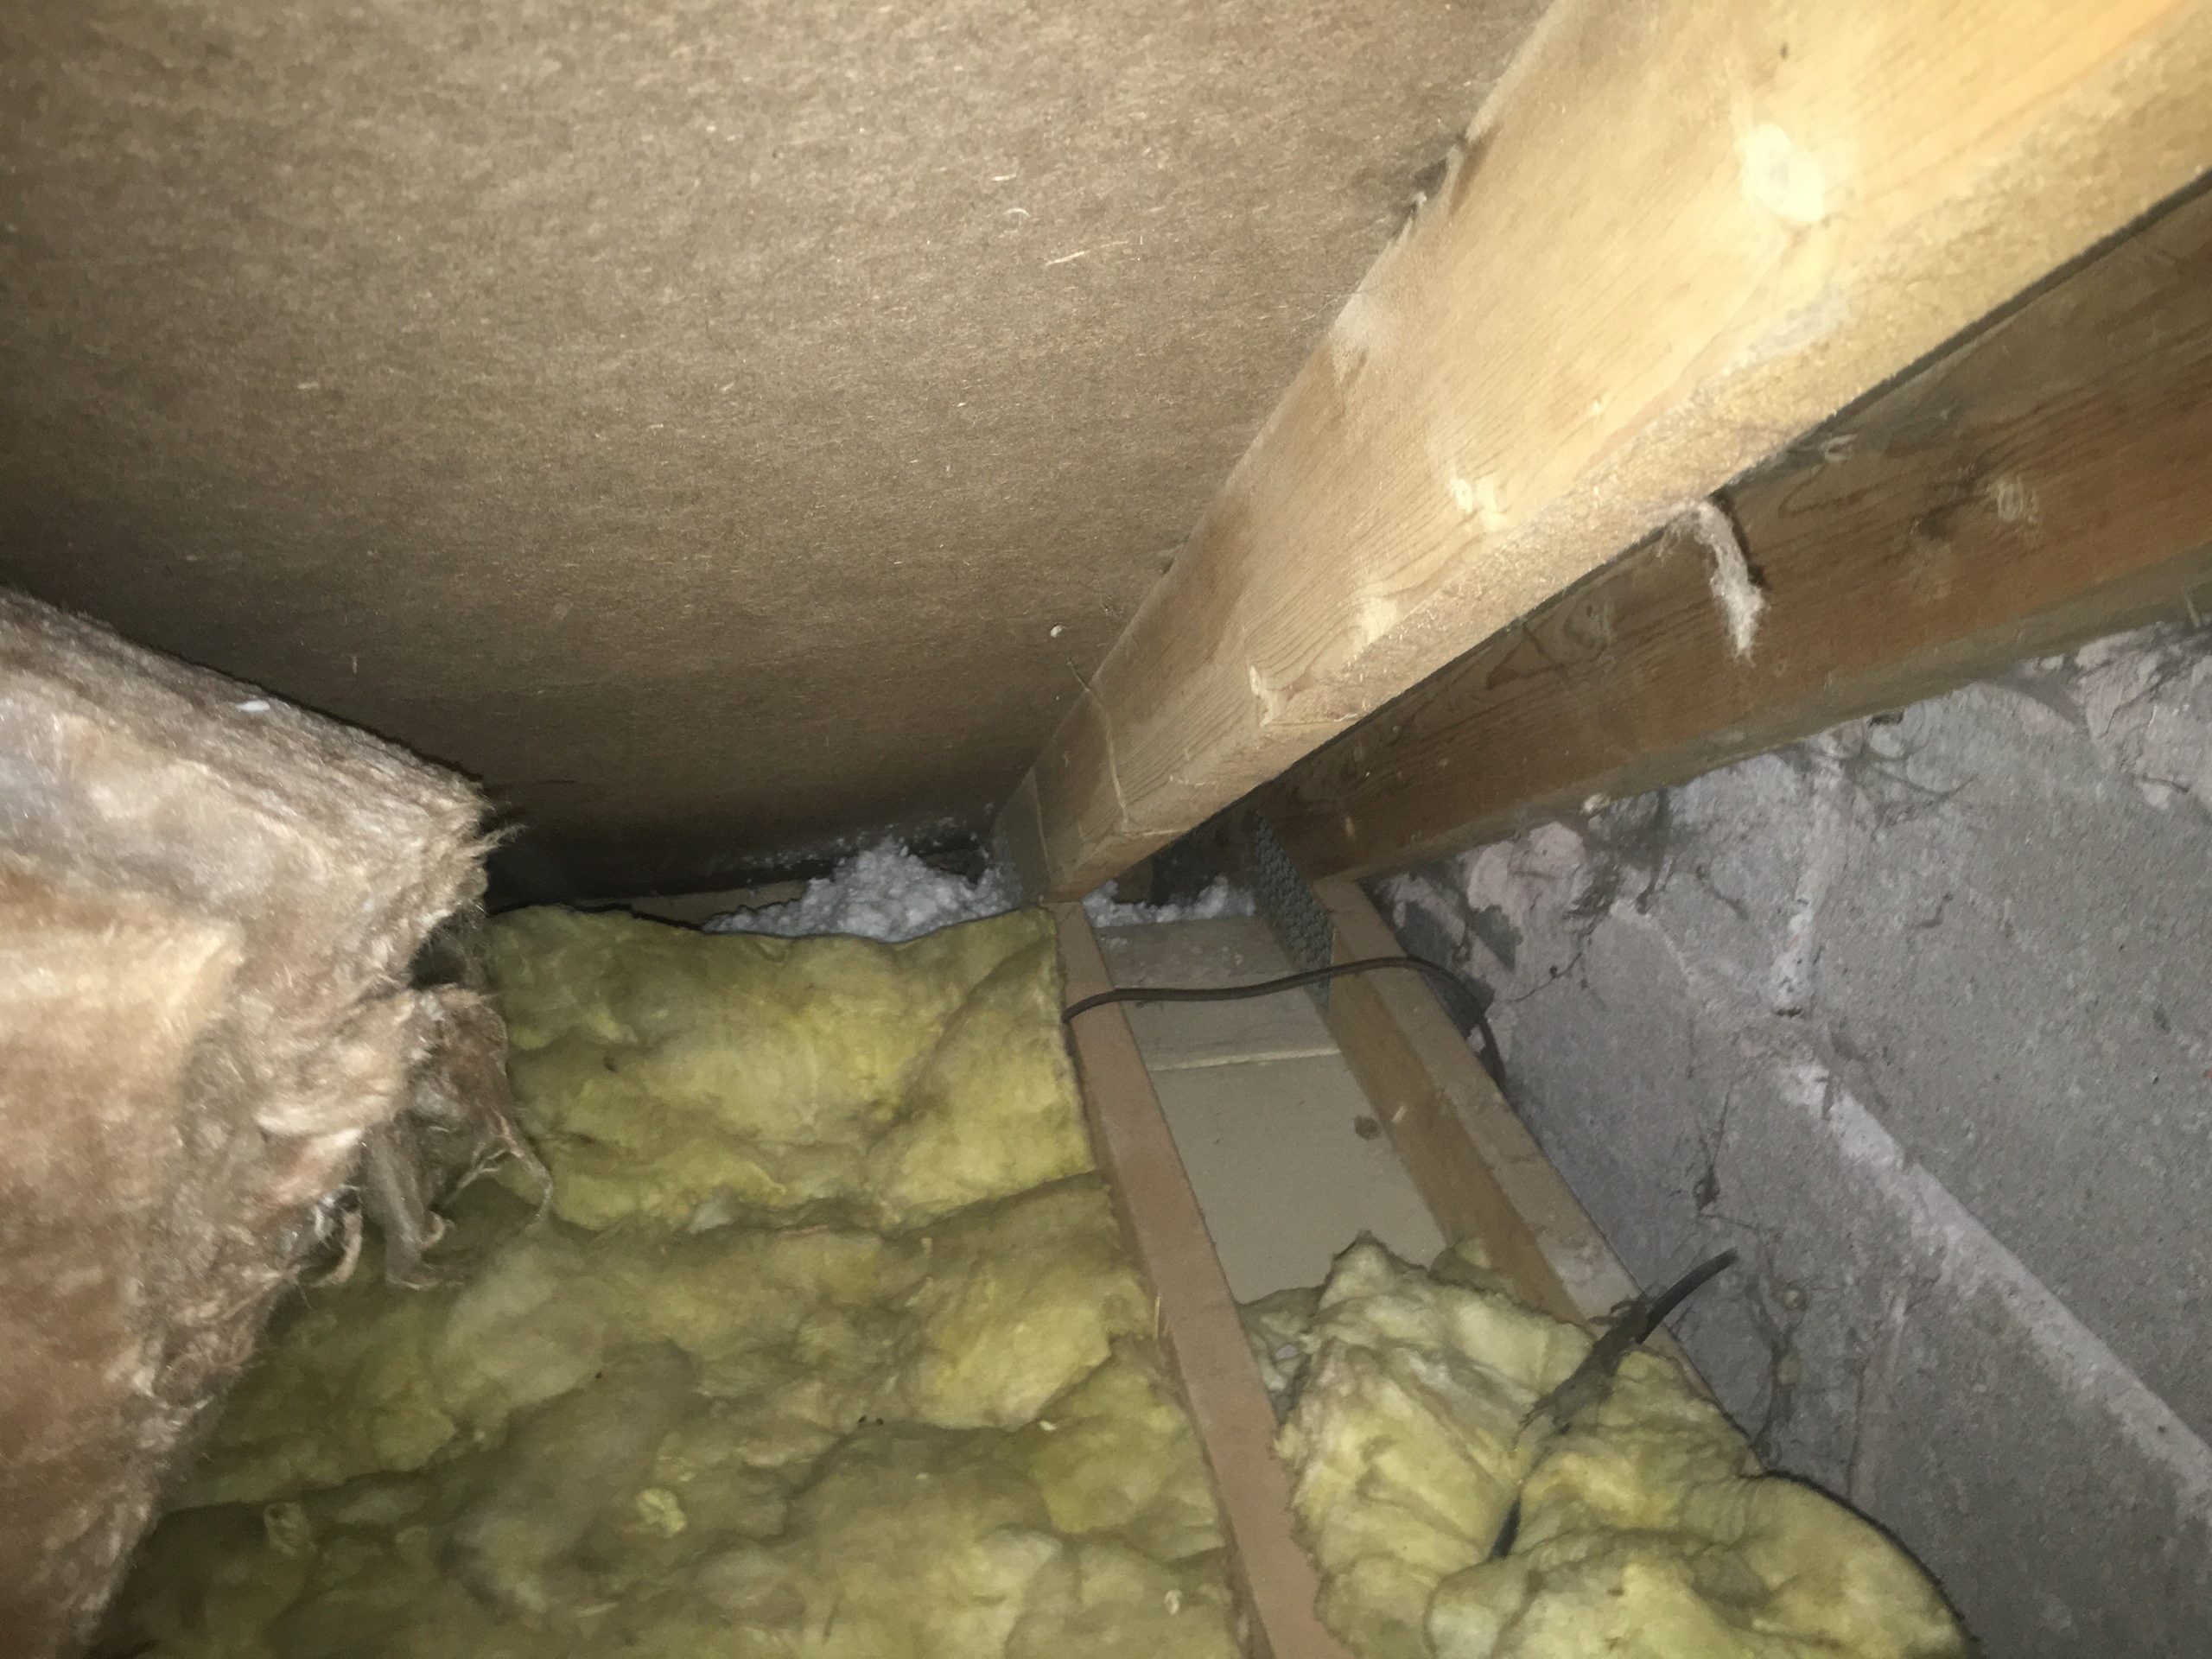 Cavity wall insulation protruding from the top of the external walls, blocking air flow.